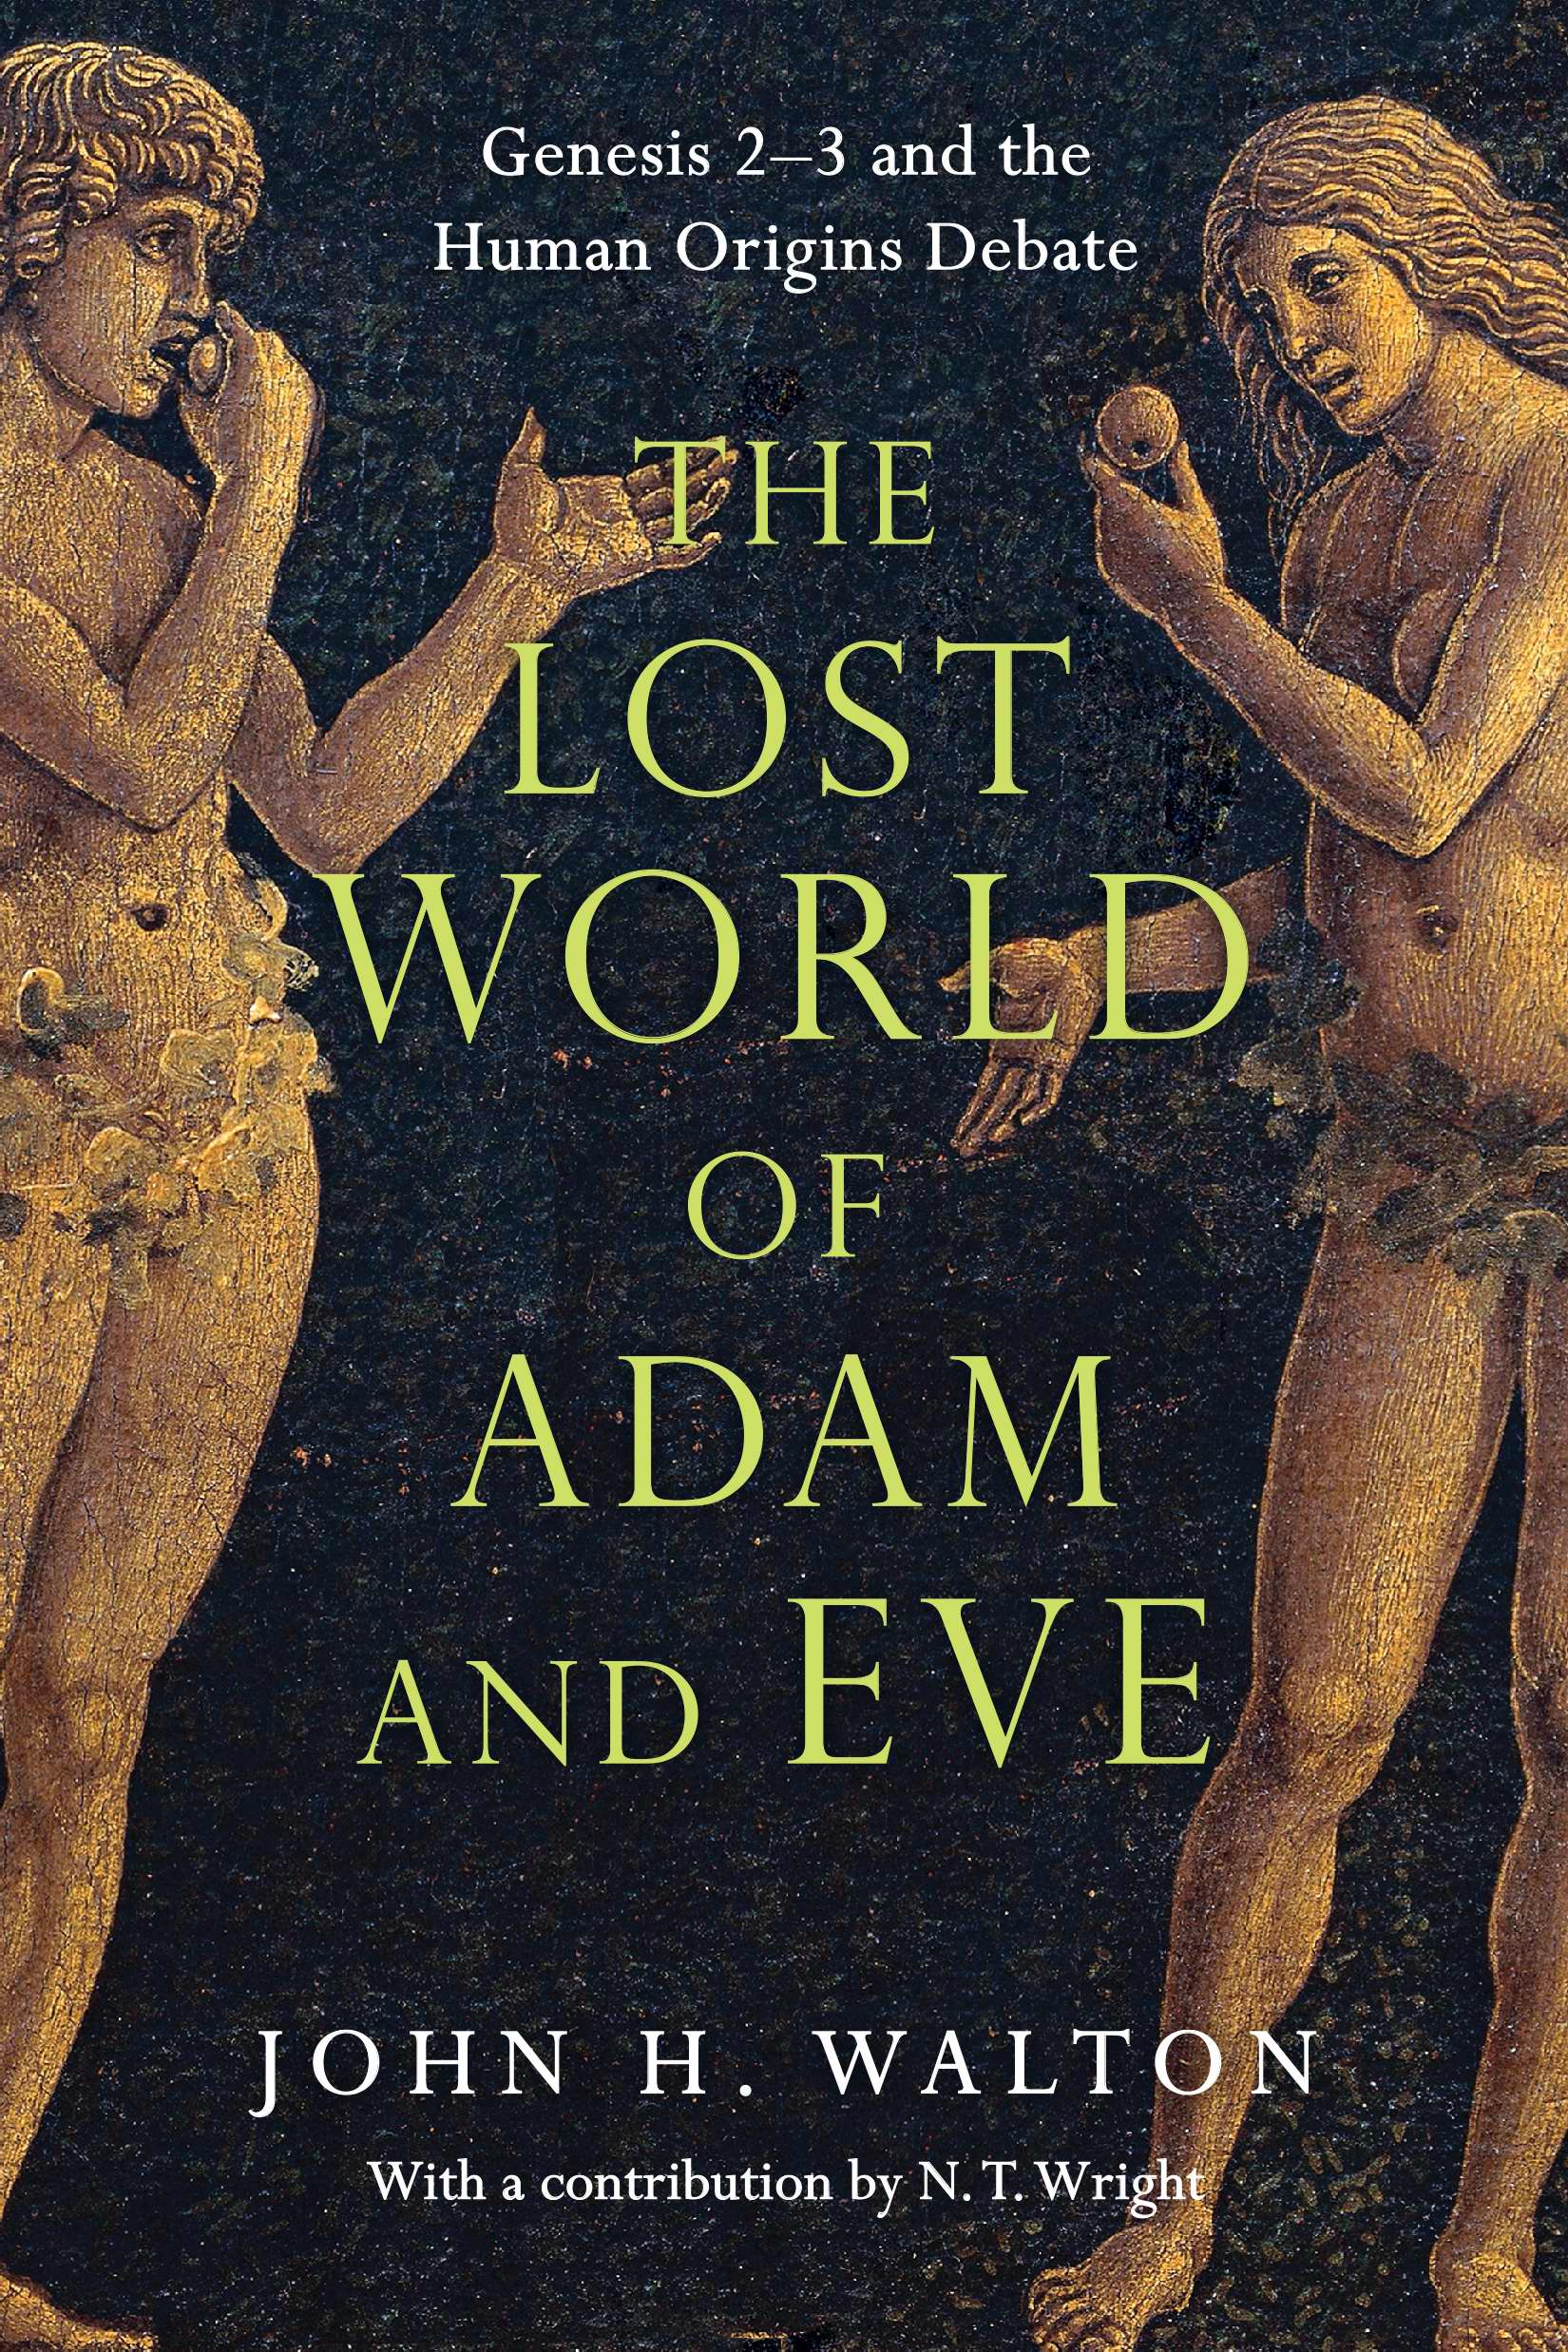 Image of The Lost World of Adam and Eve other